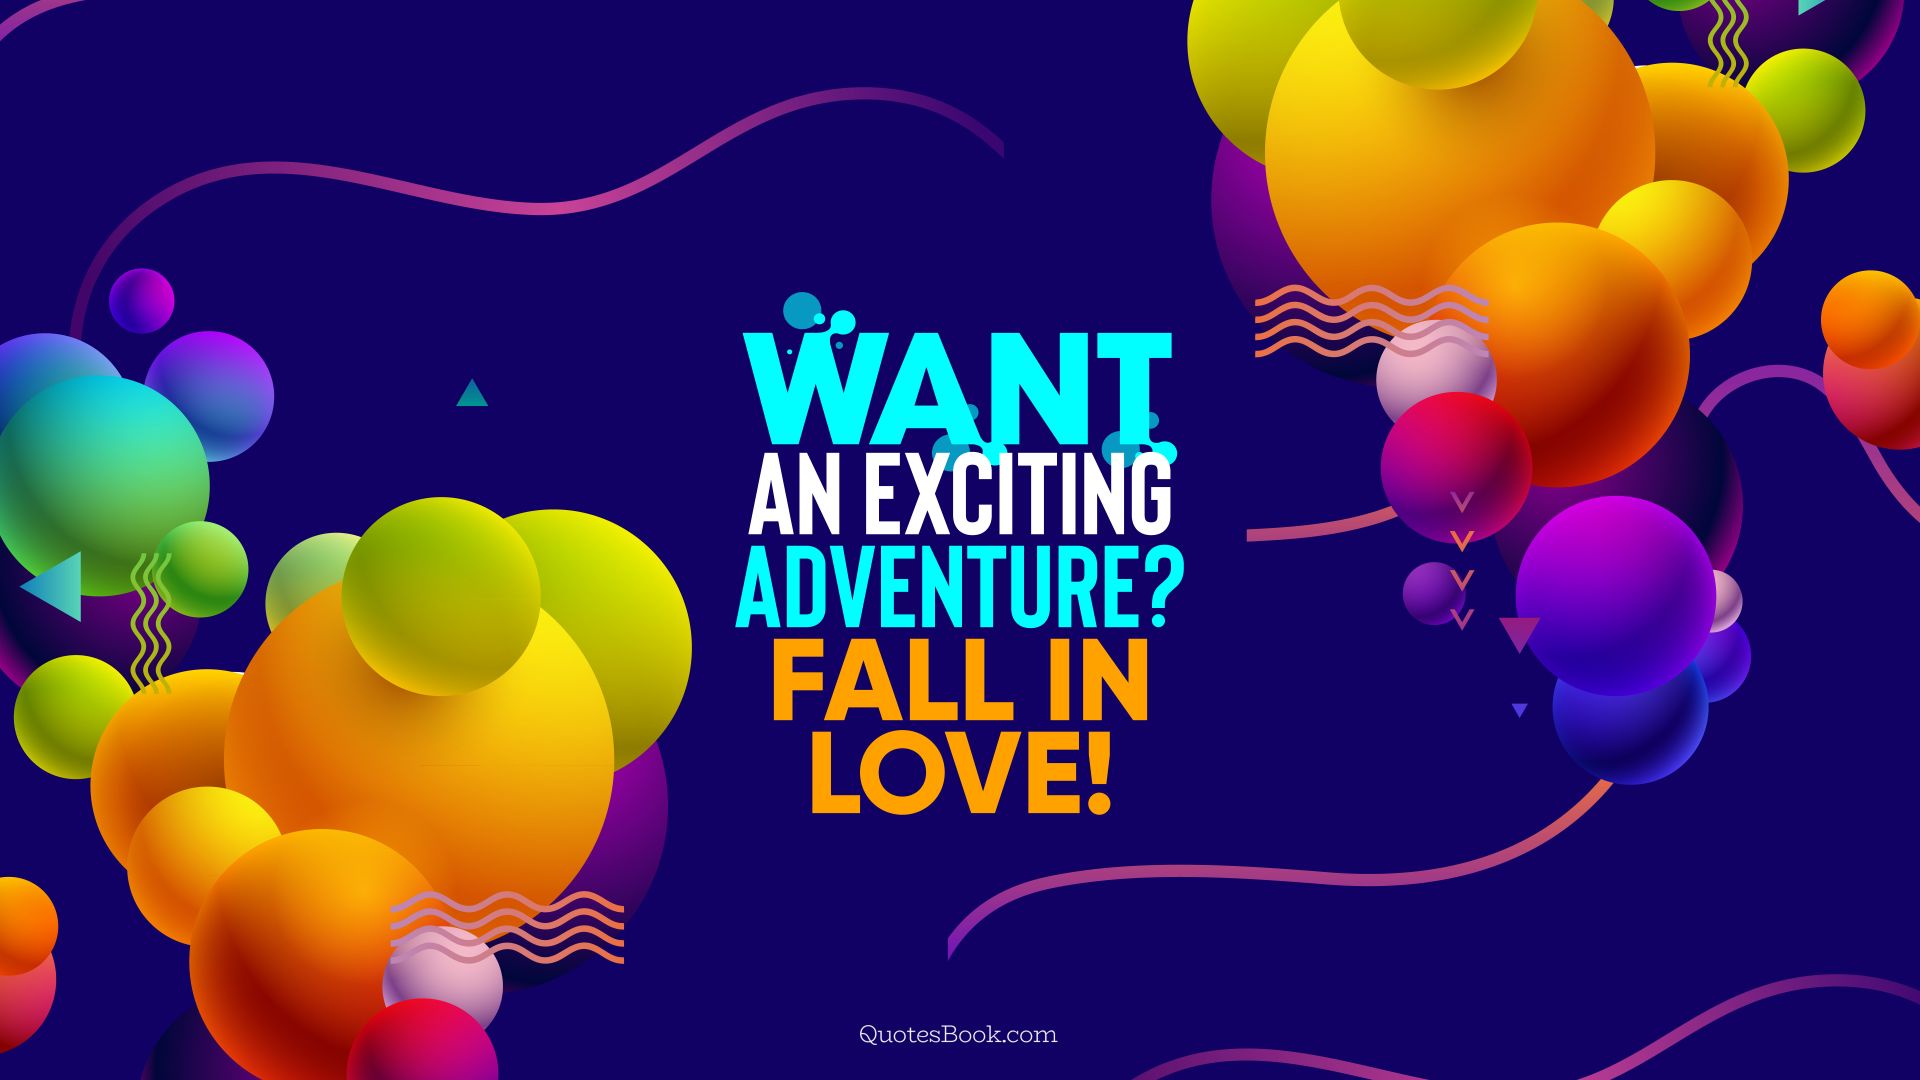 Want an exciting adventure? Fall in love!. - Quote by QuotesBook